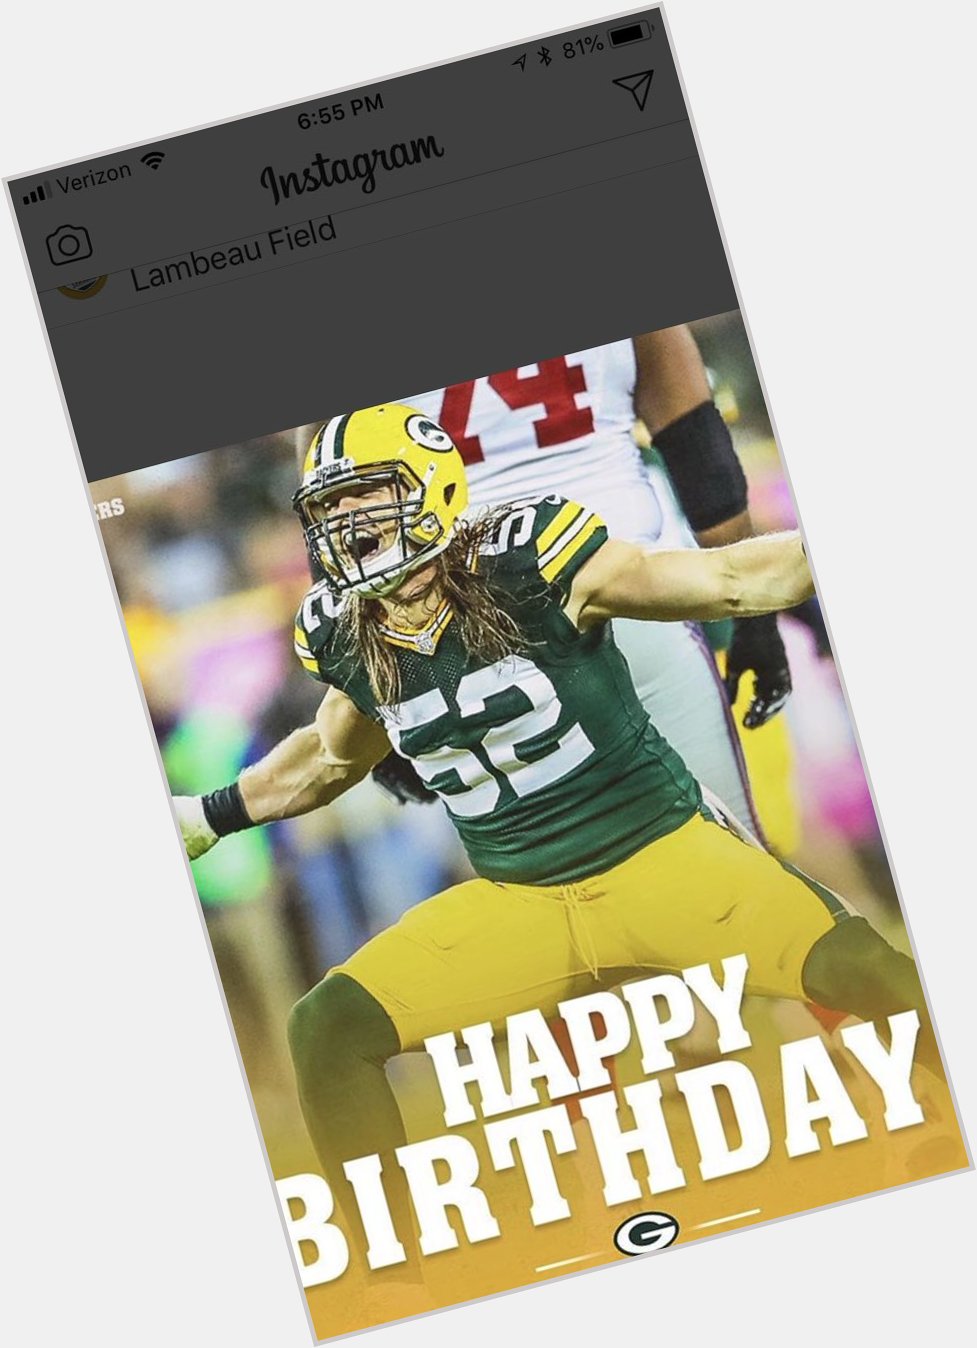 Happy Birthday! To the one and only Clay Matthews!  